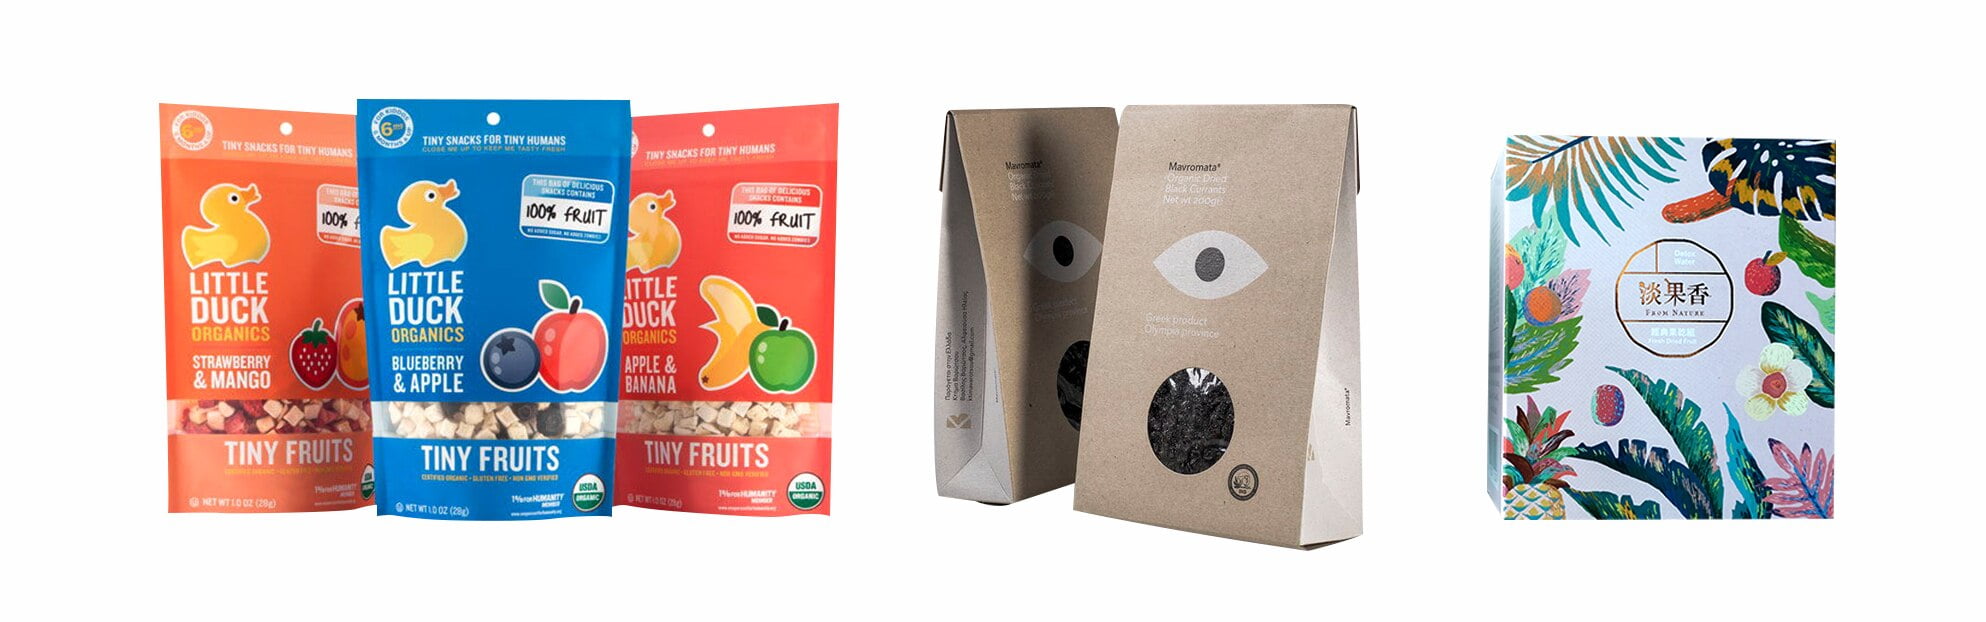 organic-dry-fruit-packaging-stand-up-bags-and-boxes-custom-printed.jpg